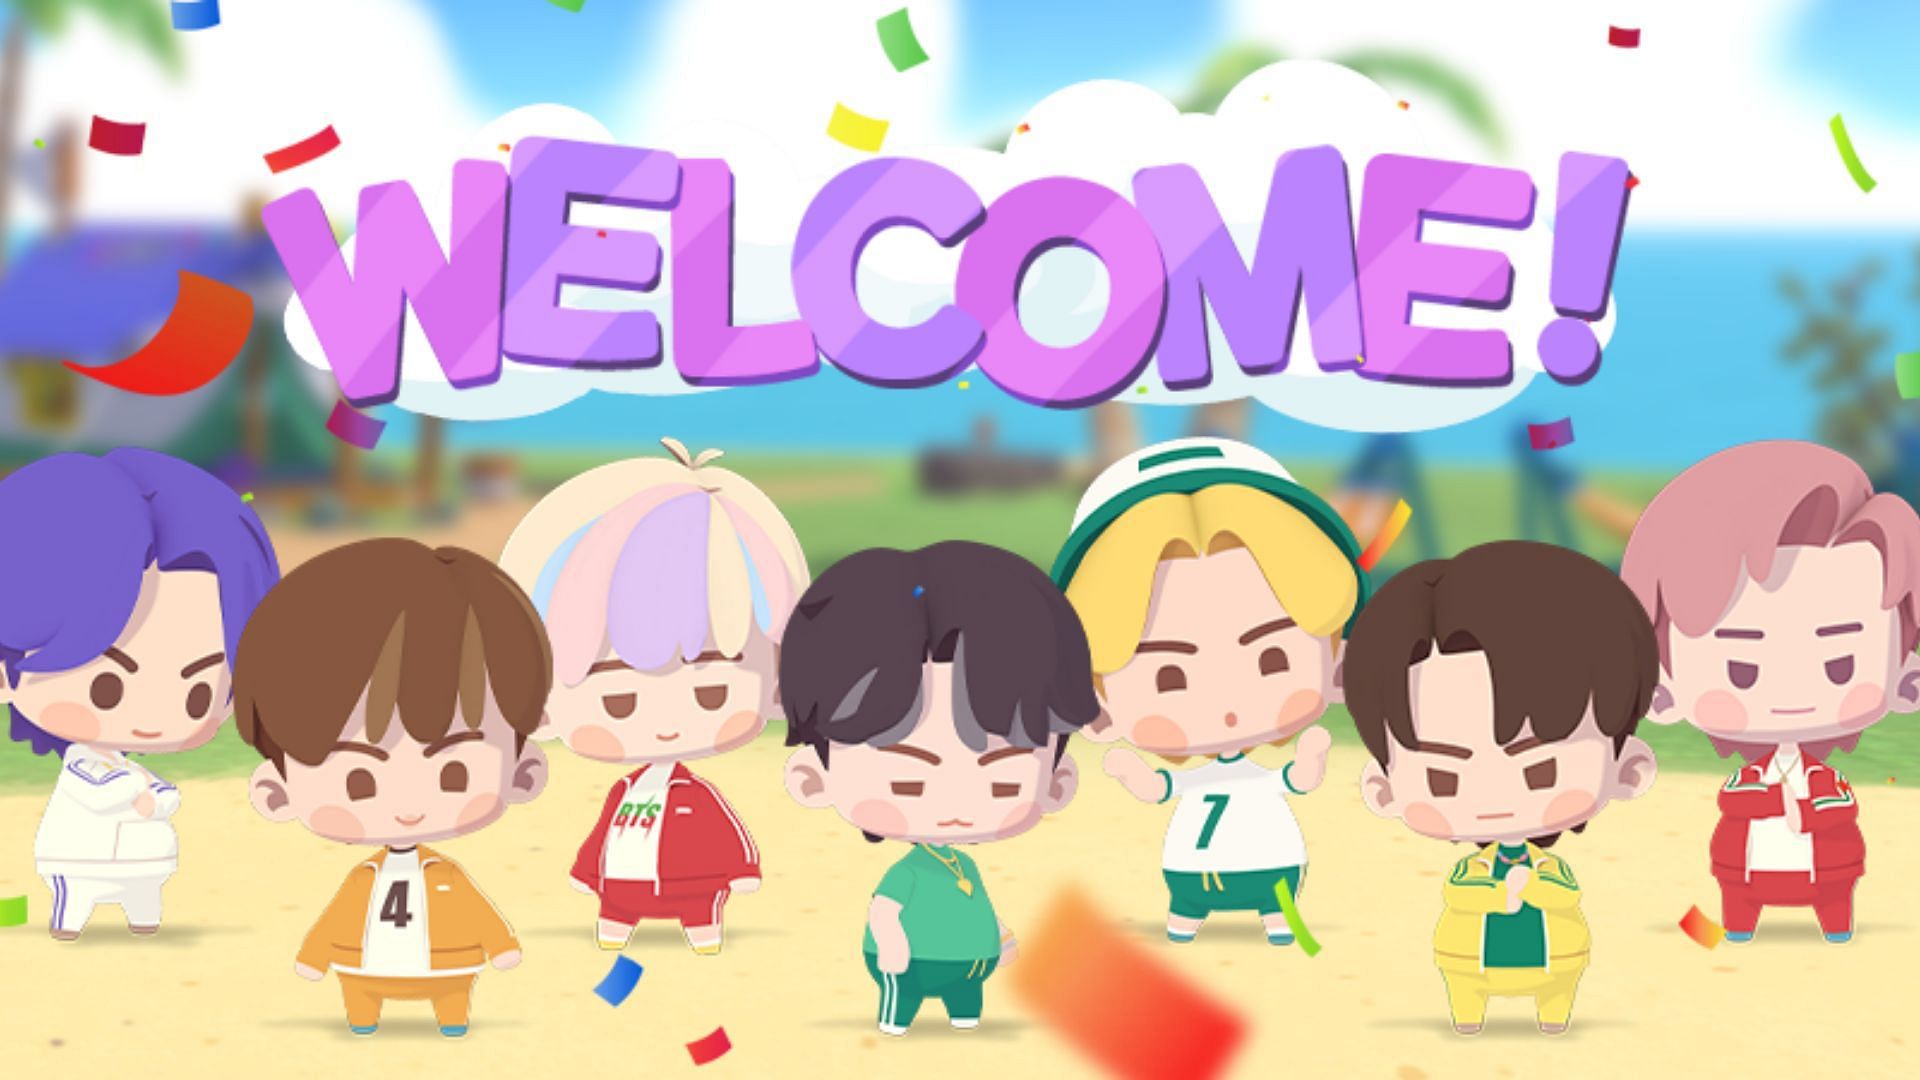 Official welcome poster of the group&#039;s upcoming game (Image via @INTHESEOM_BTS/Twitter)